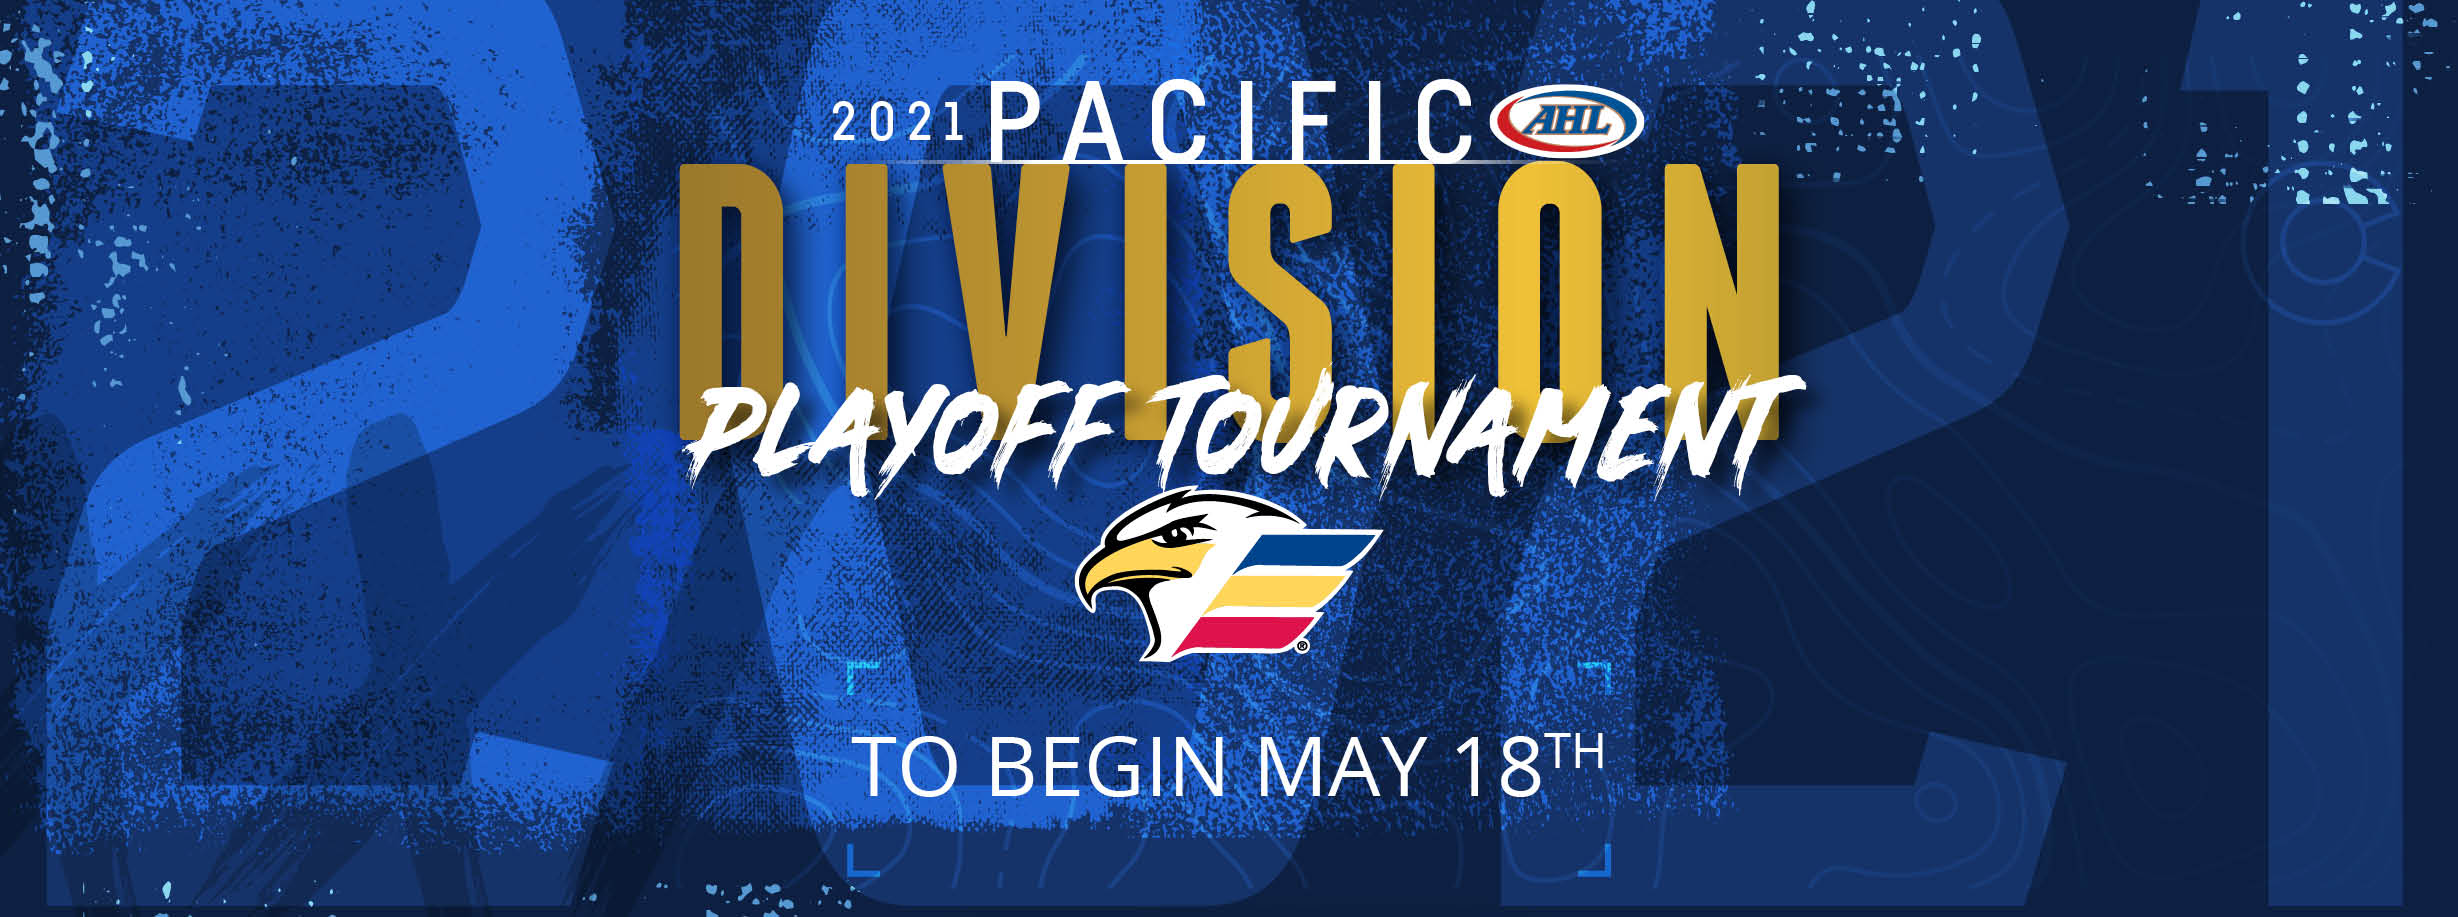 AMERICAN HOCKEY LEAGUE ANNOUNCES DETAILS FOR 2021 PACIFIC DIVISION PLAYOFFS  